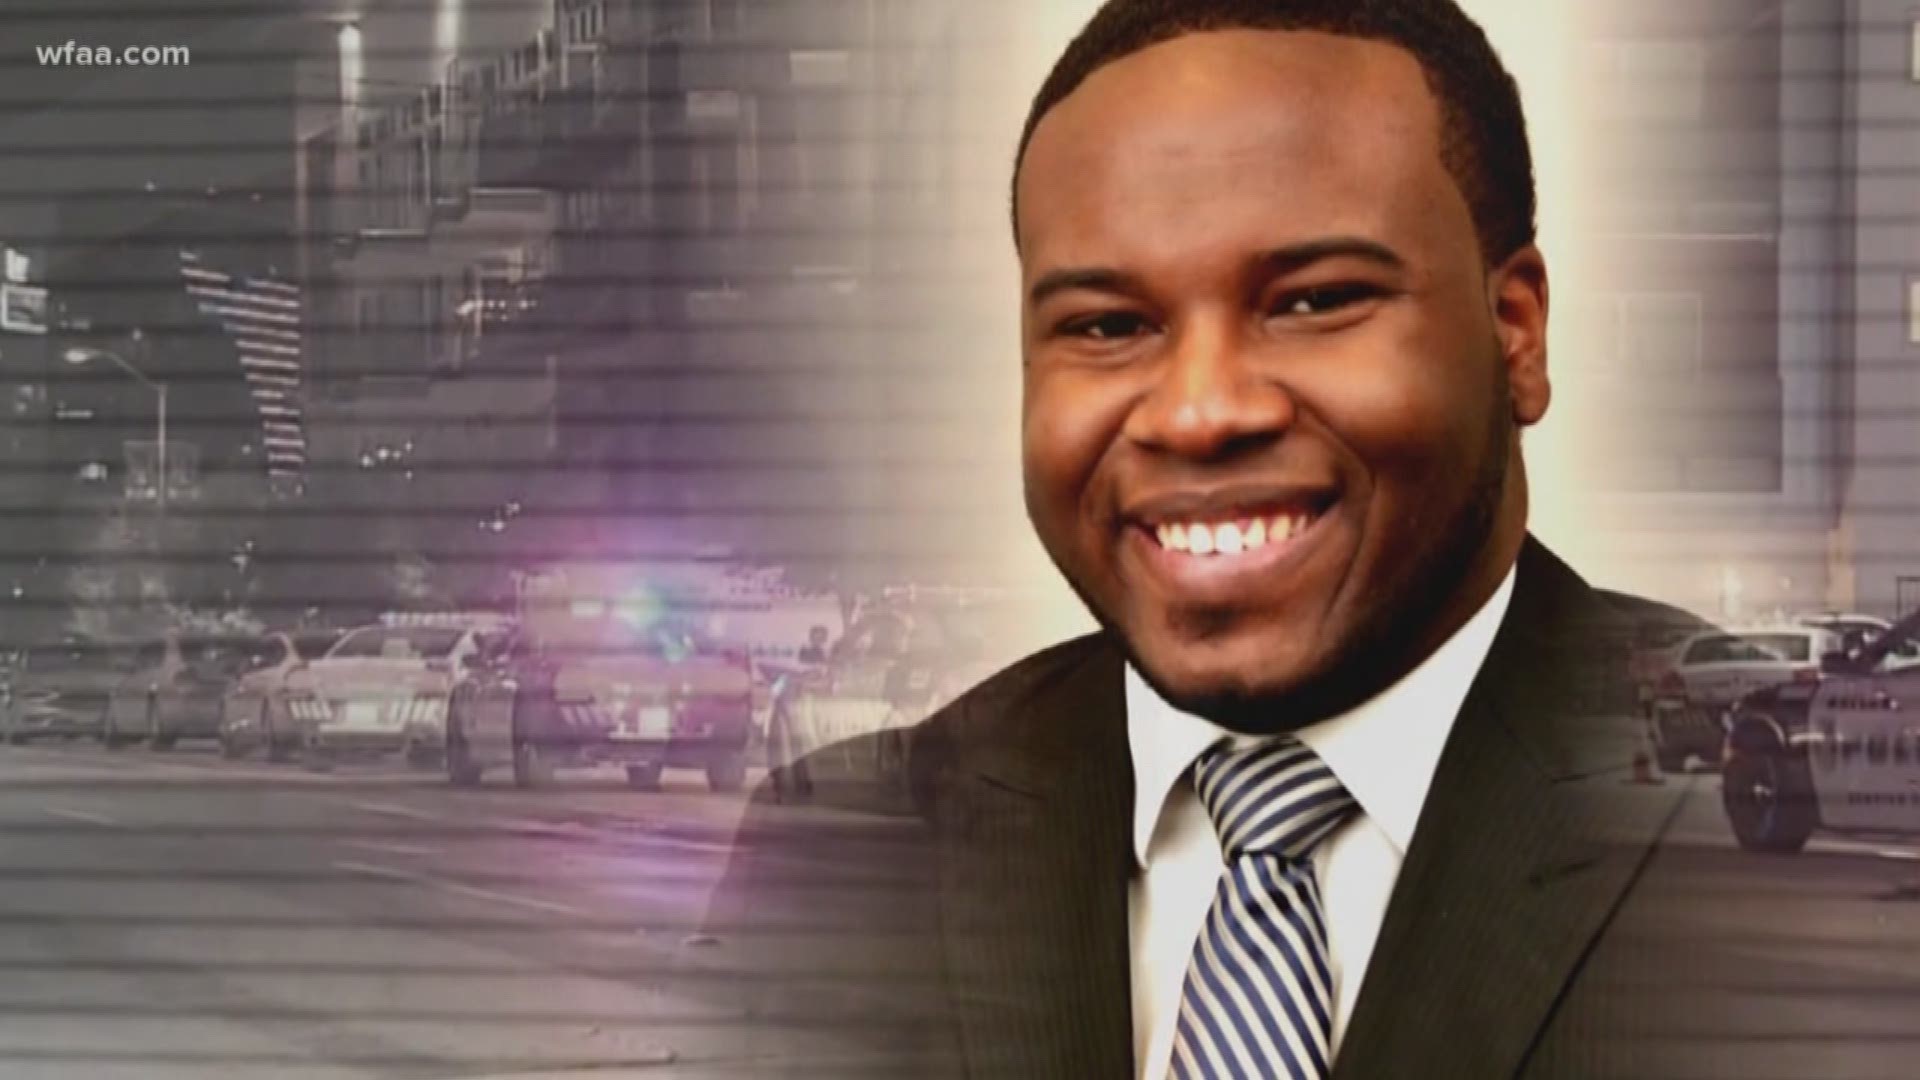 That’s the question Dallas has been asking since September when the fired police officer shot 26-year-old Botham Jean in his own apartment.